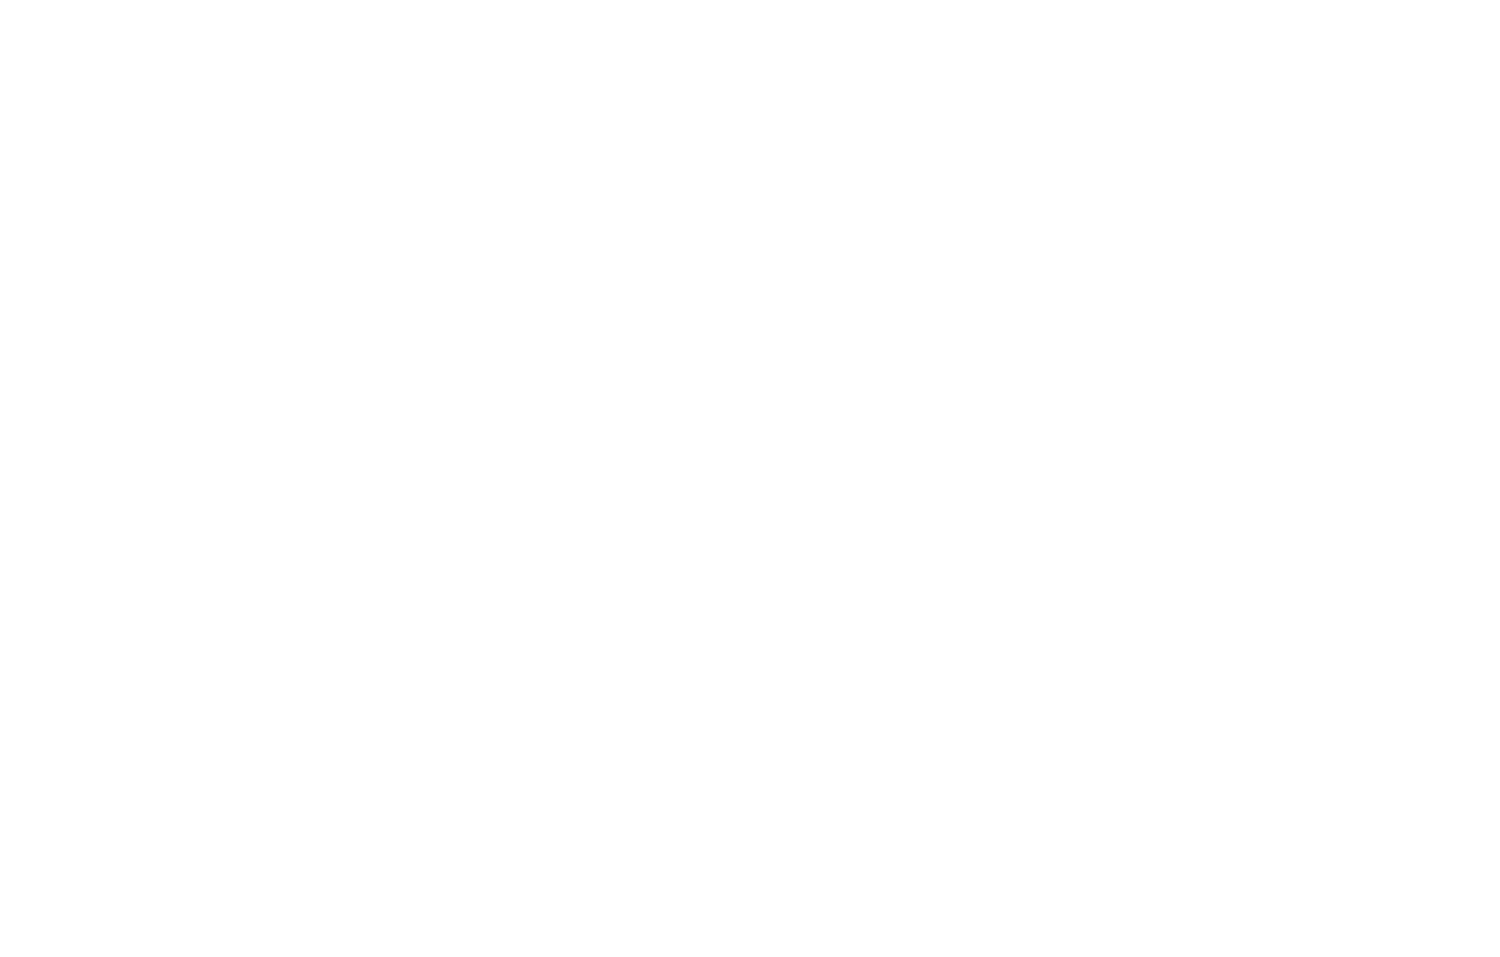 Eco Solutions 44